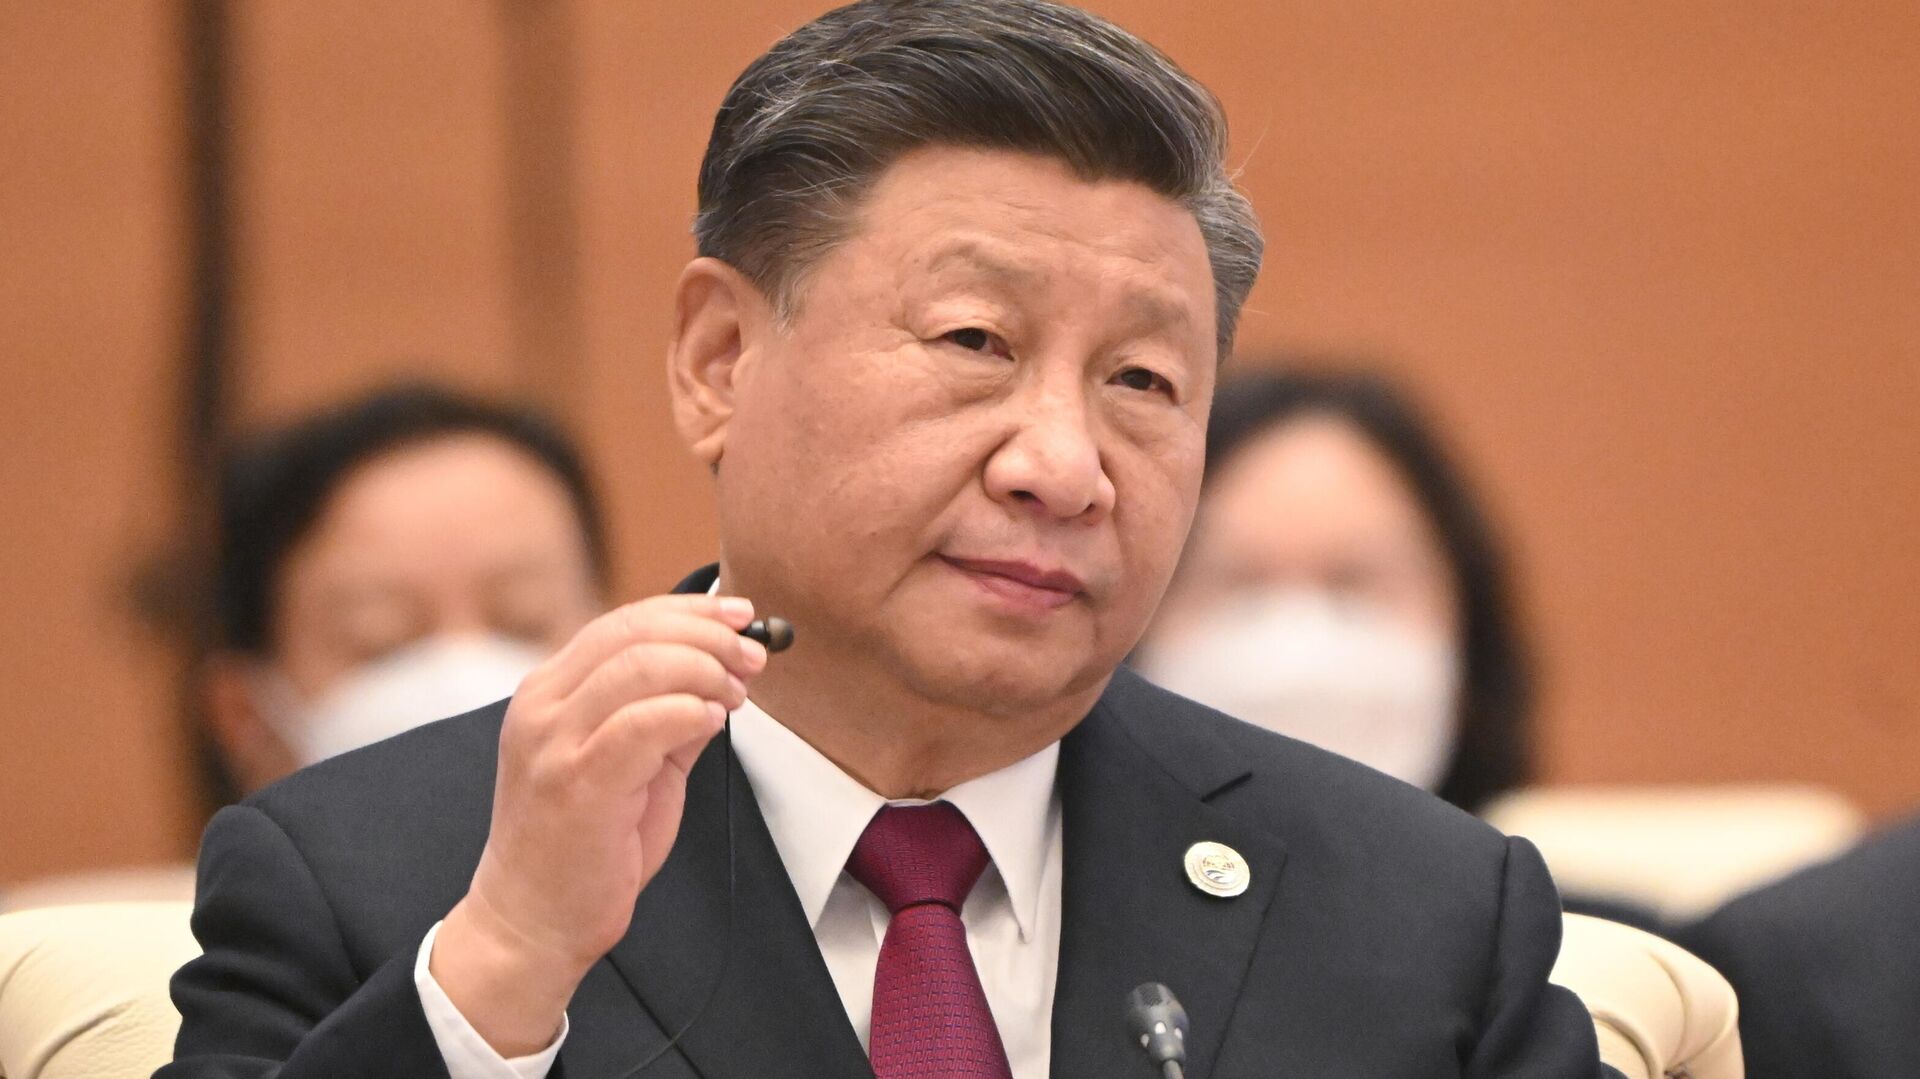 September 16, 2022. Chinese President Xi Jinping at an expanded meeting of the Shanghai Cooperation Organization (SCO) Council of Heads of State - Sputnik International, 1920, 18.08.2023